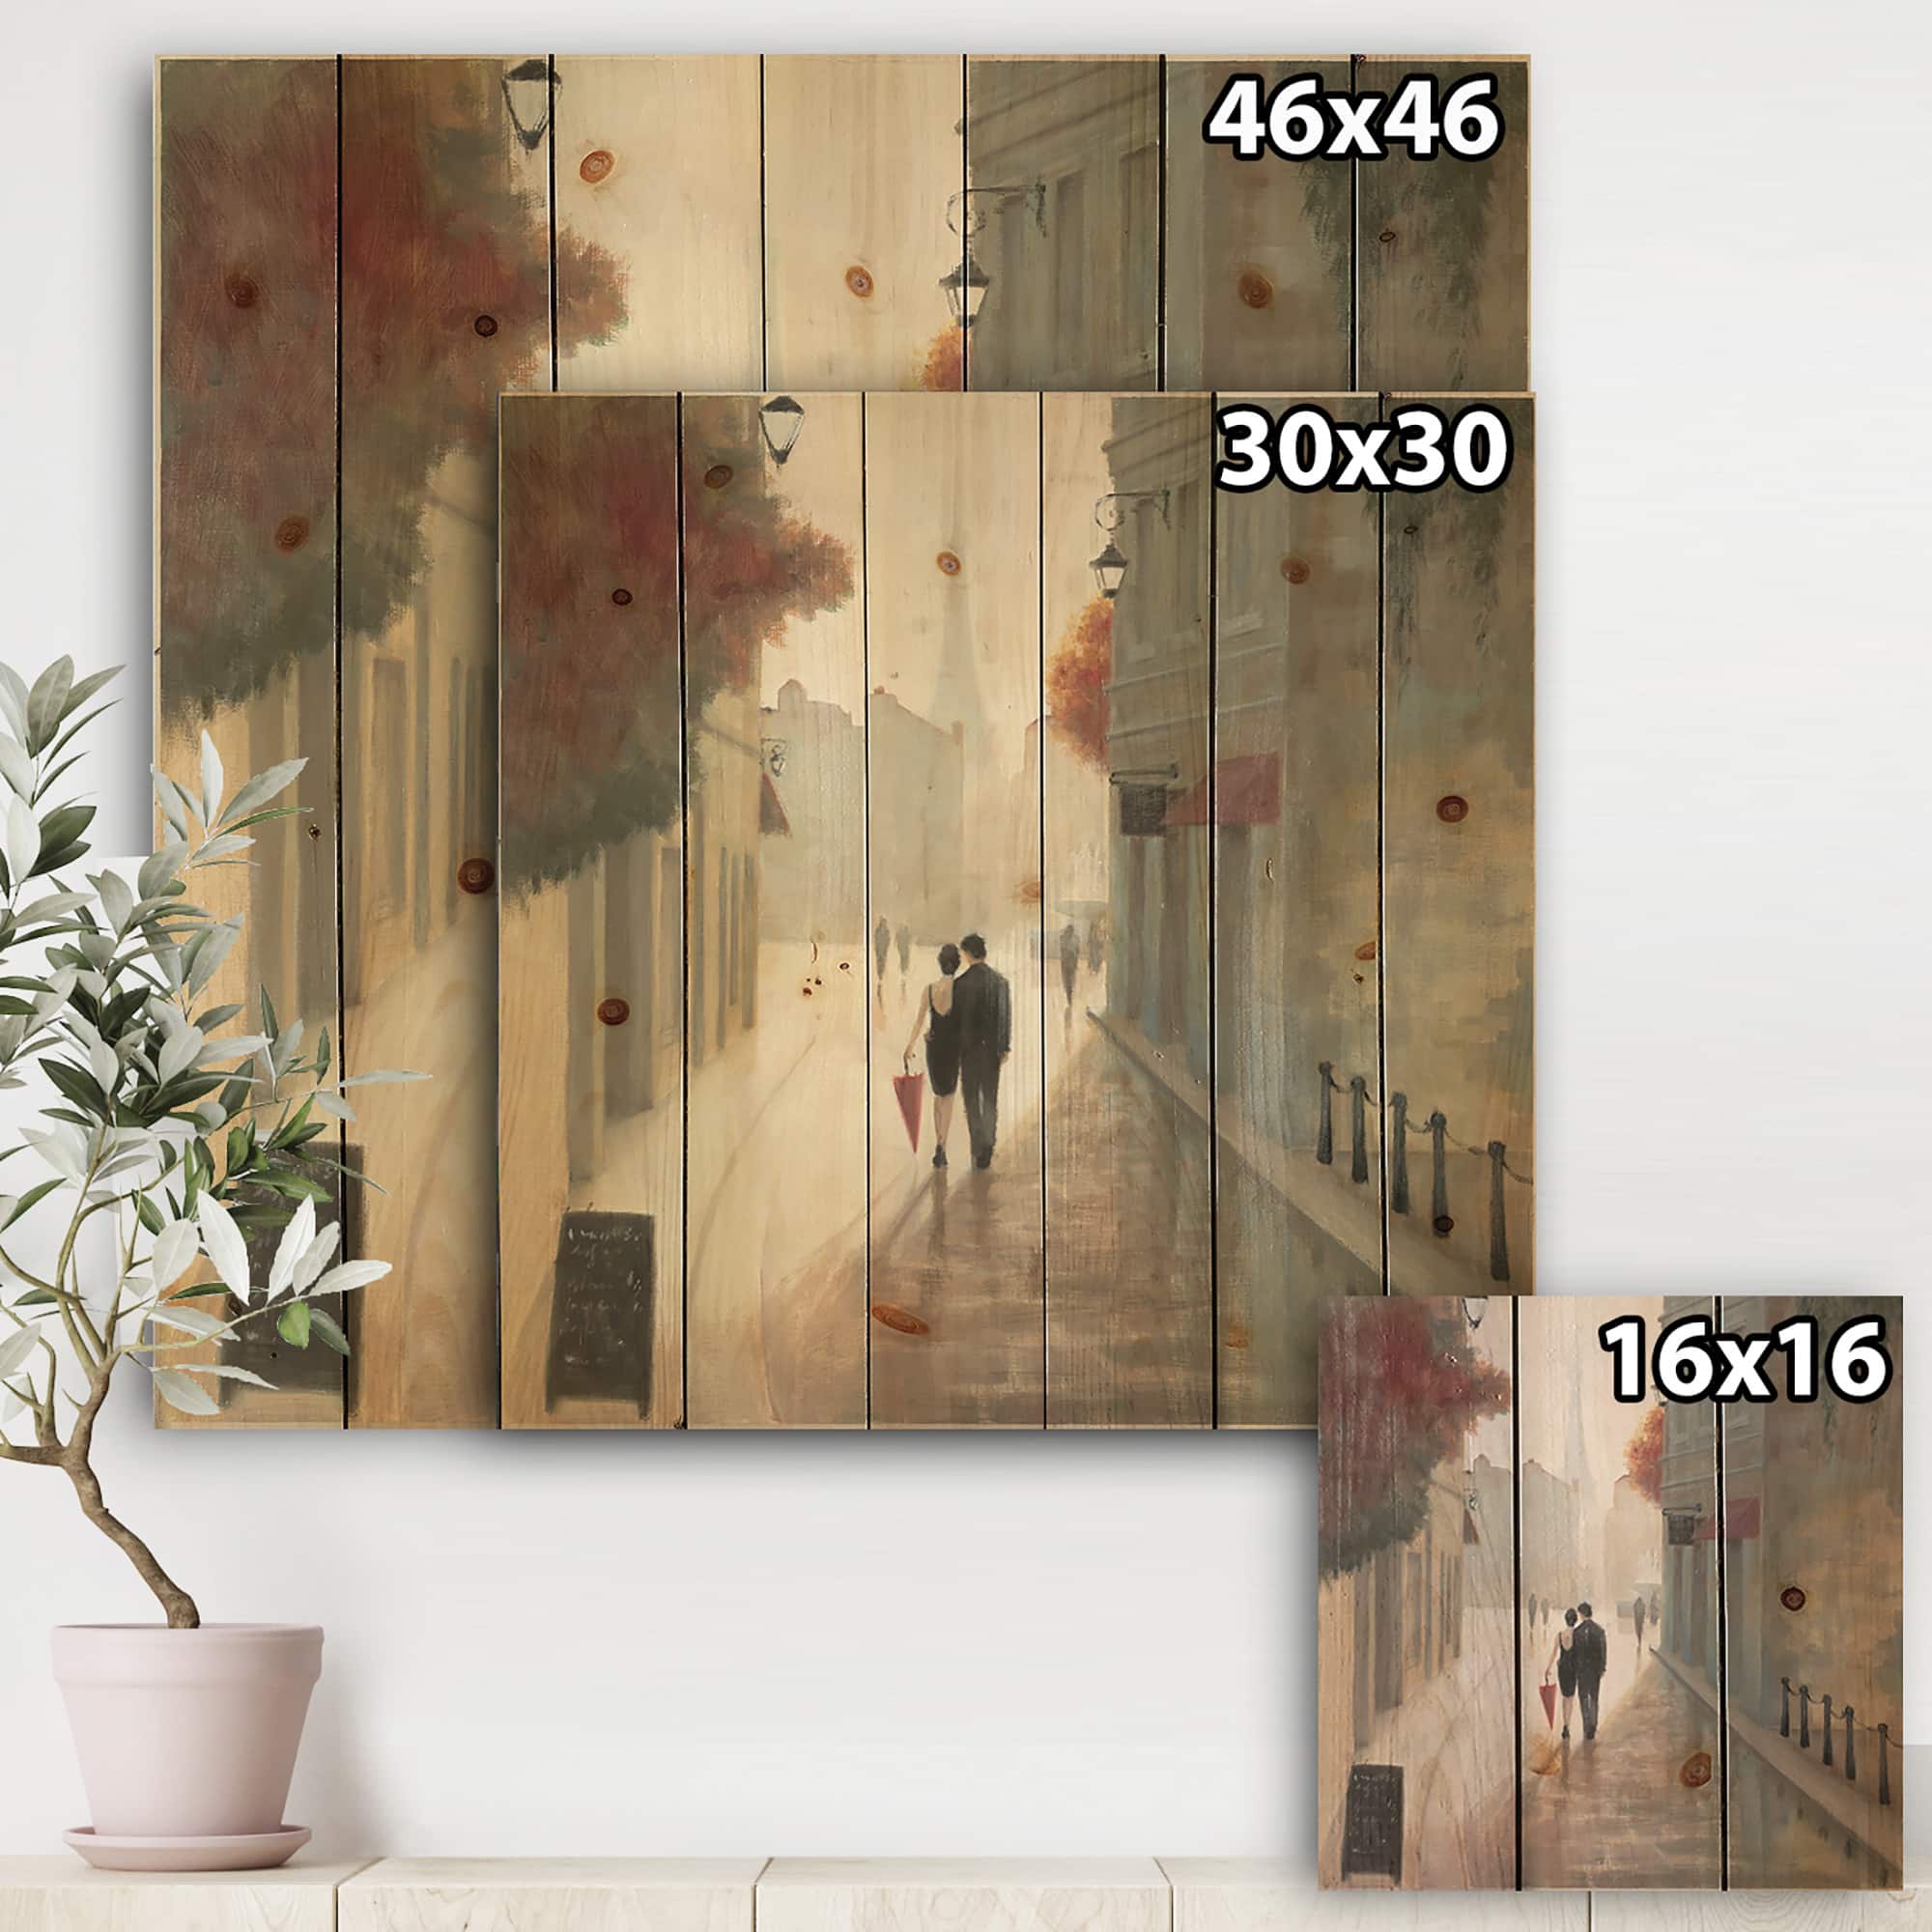 Designart - Paris Romance Couples II - Romantic French Country Print on Natural Pine Wood